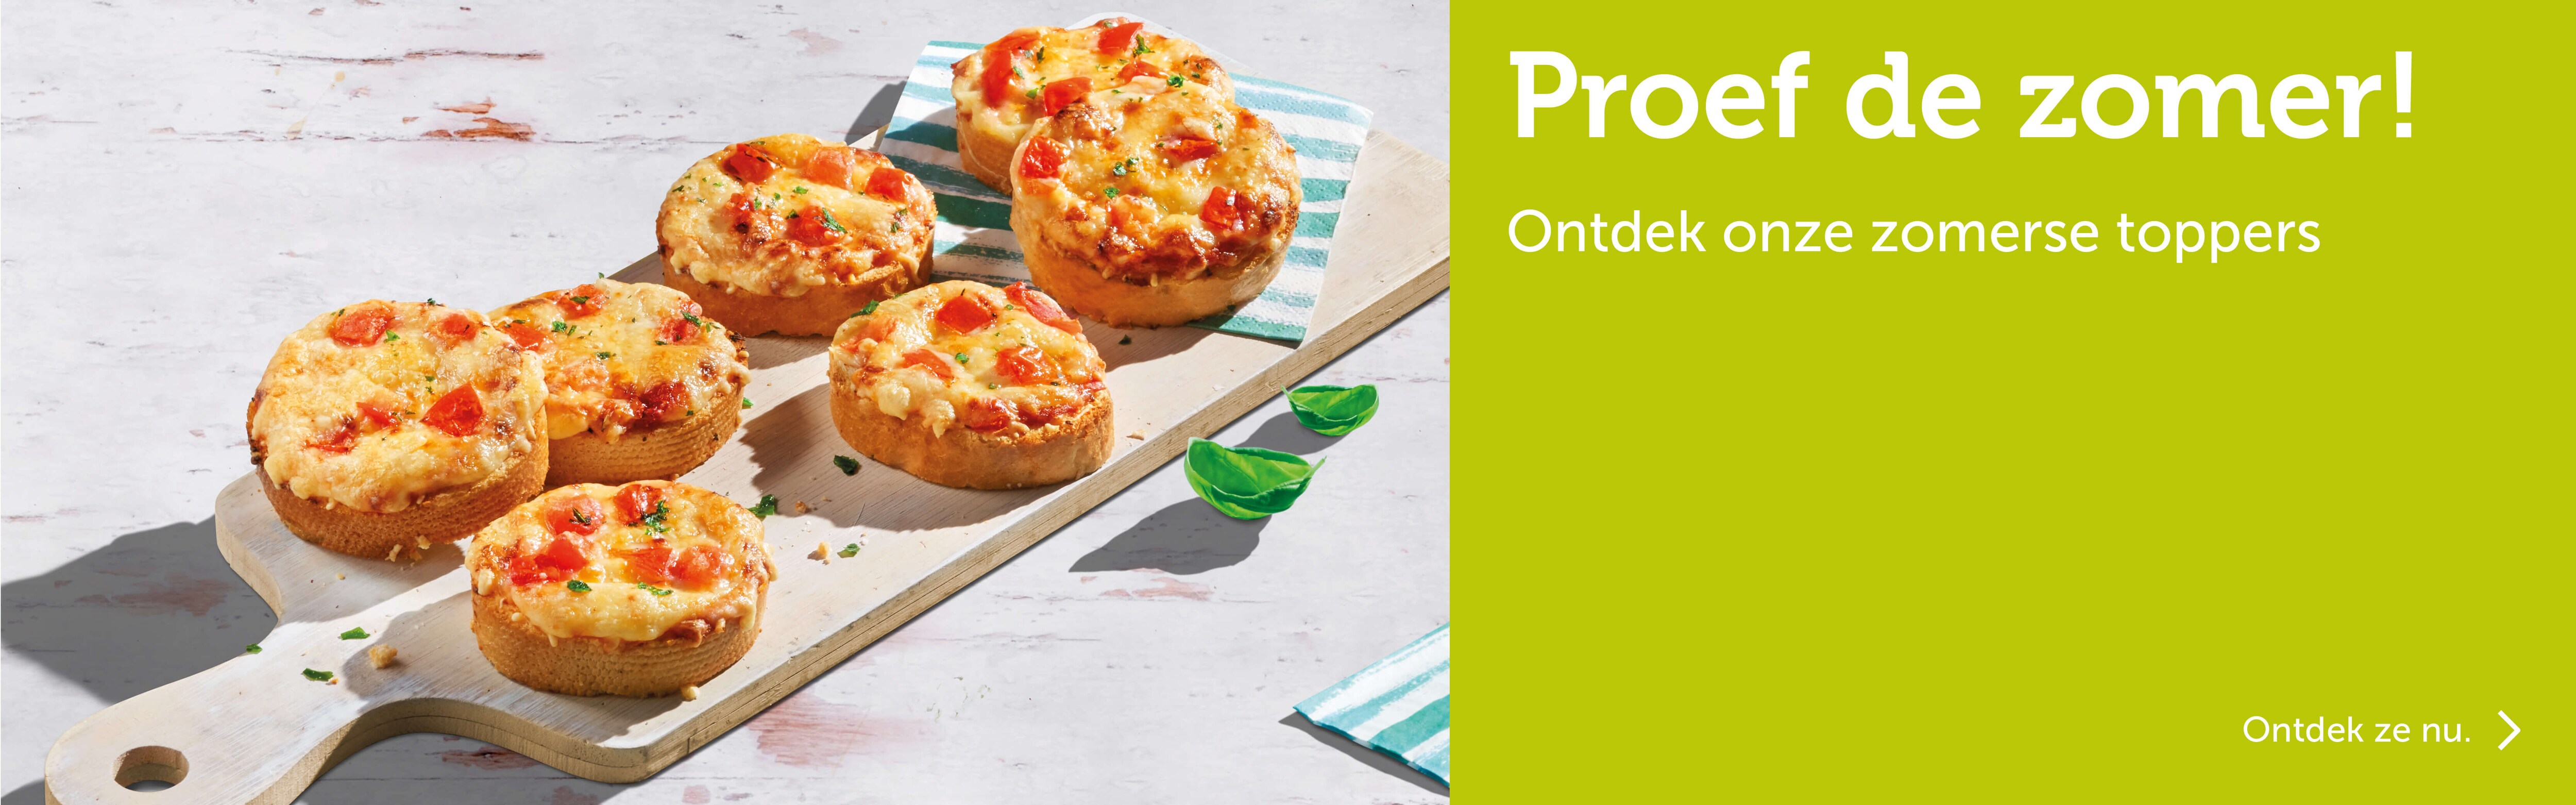 Ontdek onze zomerse bofrost*toppers